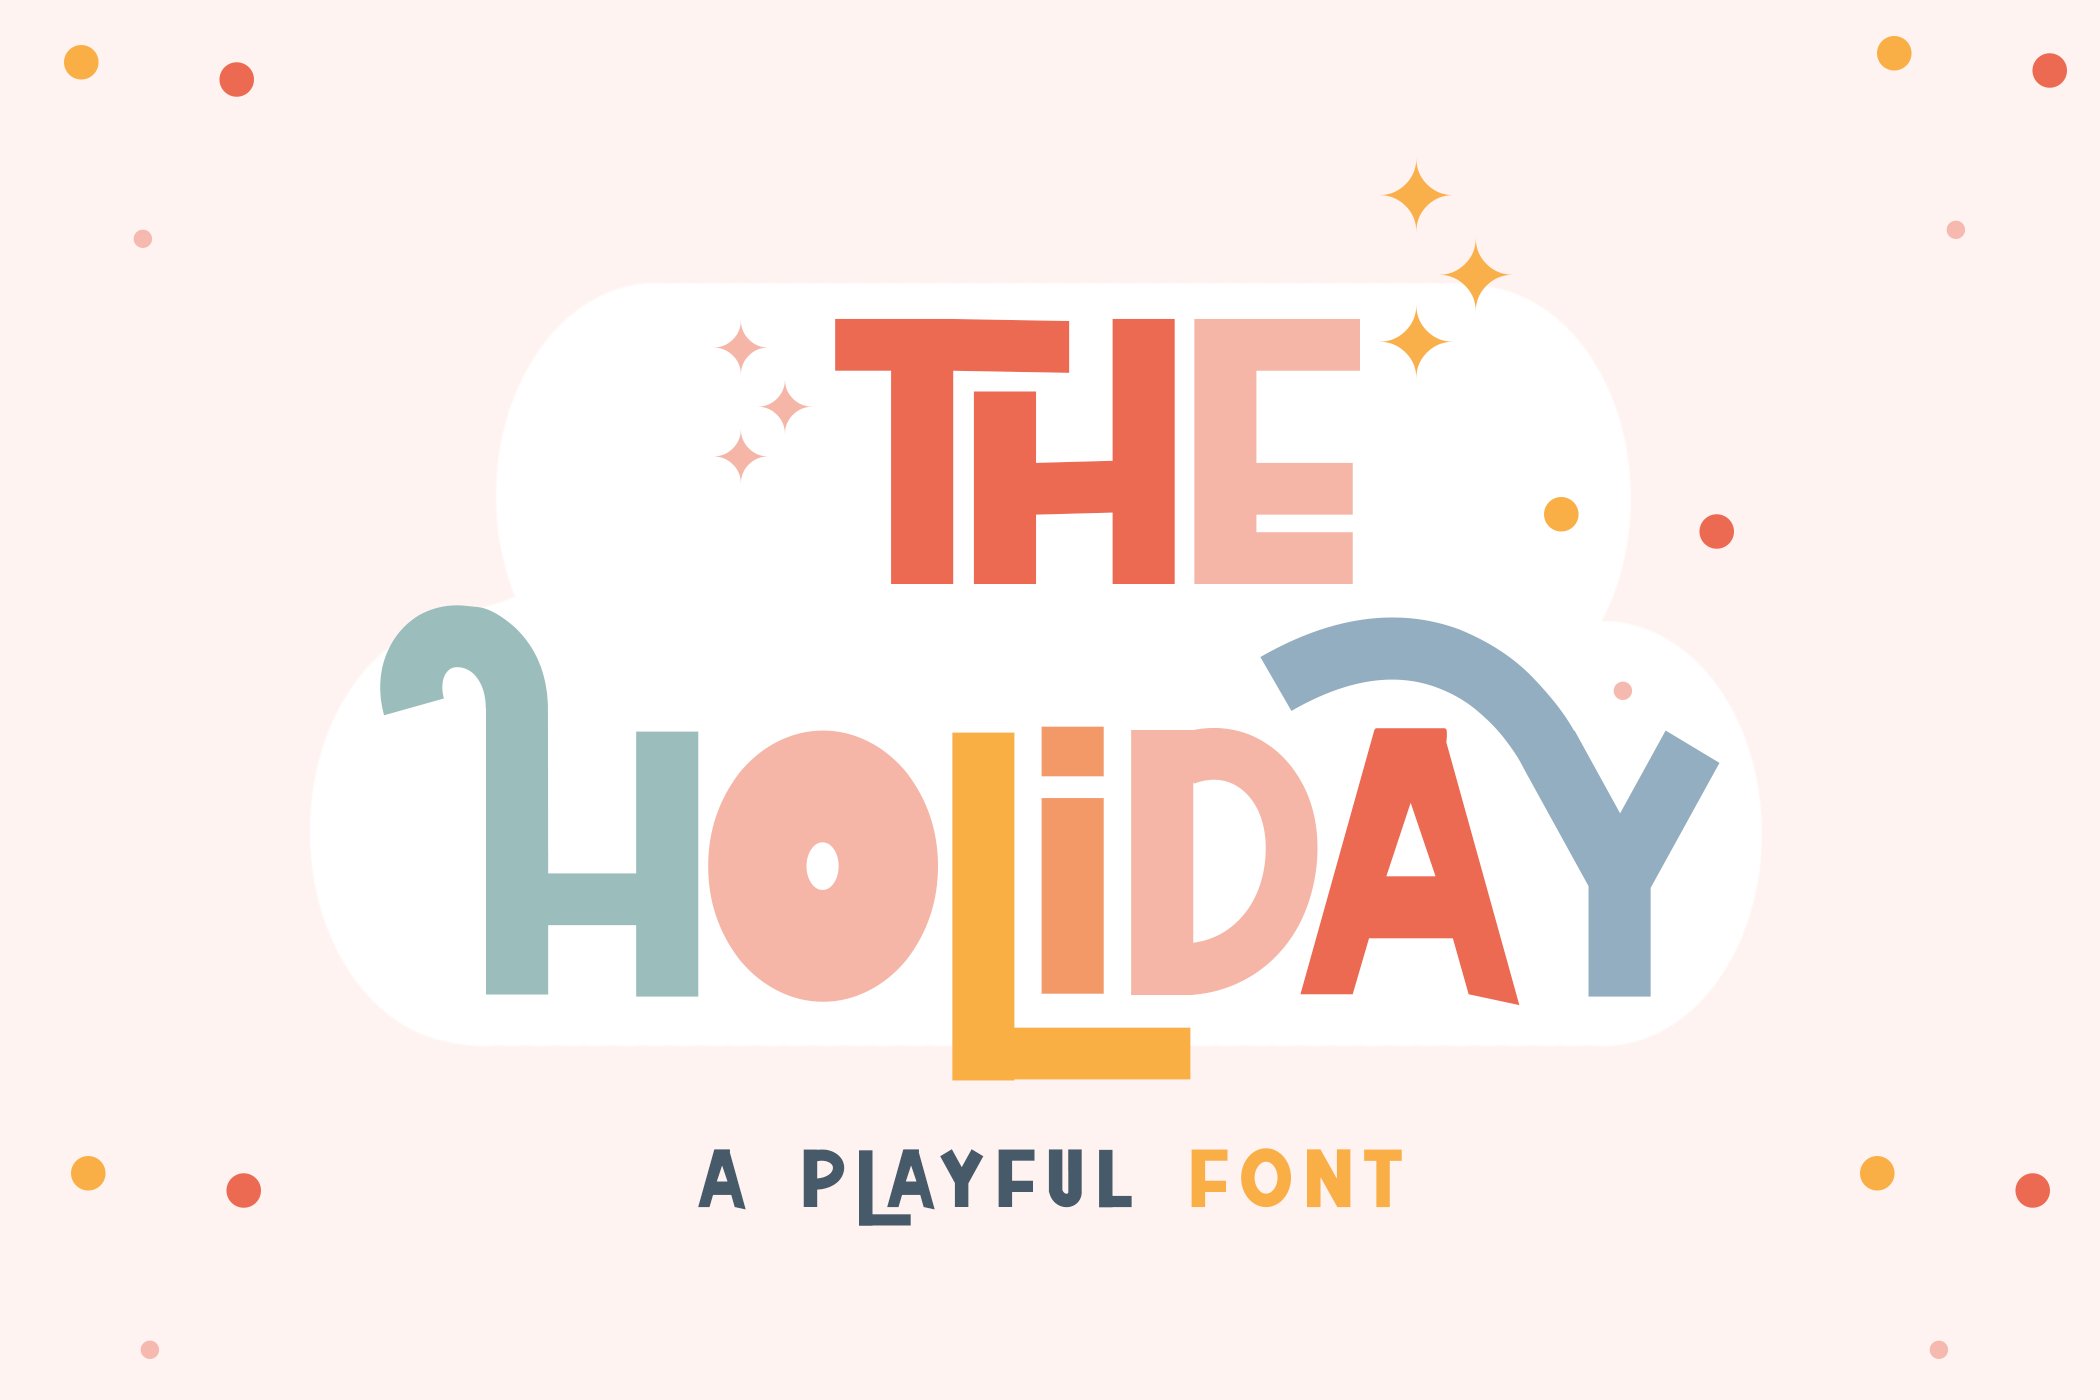 The Holiday Font cover image.